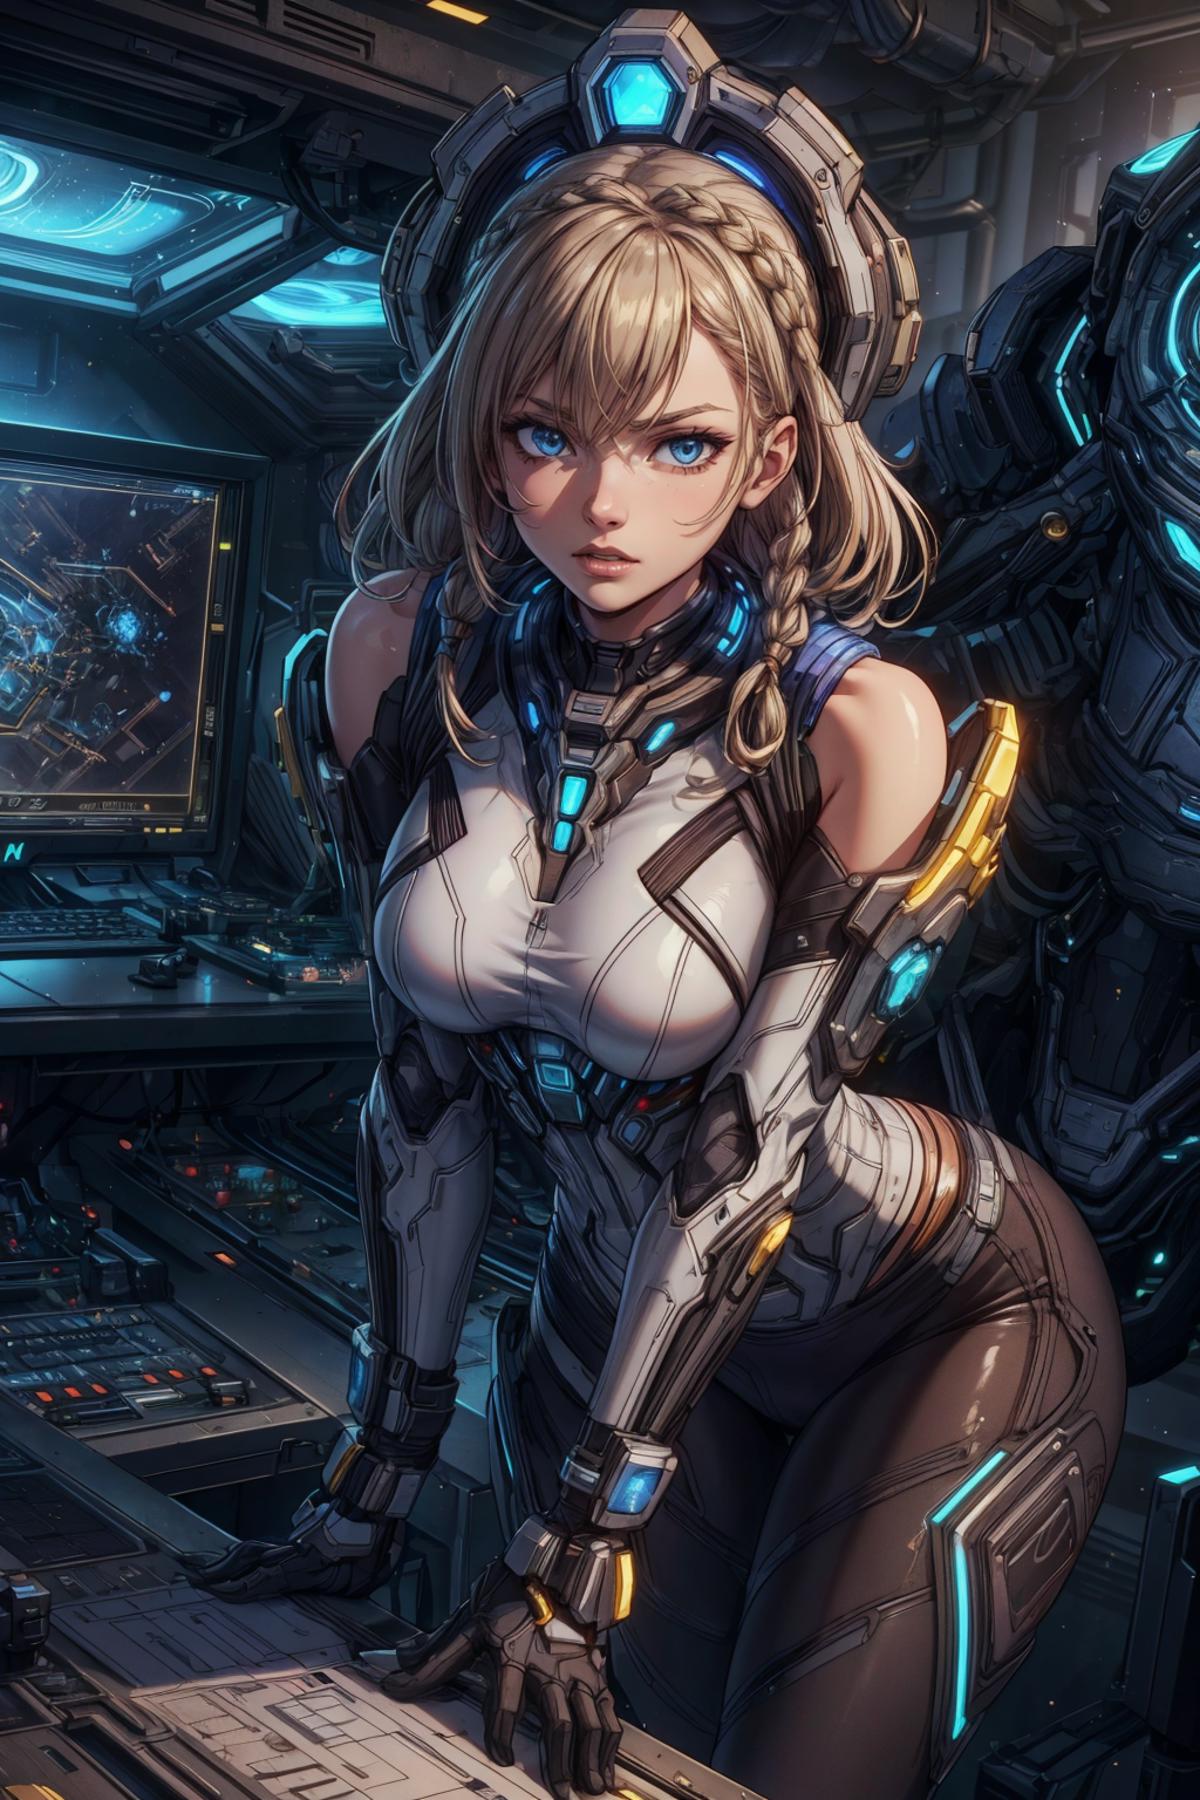 Anime-style girl with blue eyes and pigtails posing in a futuristic setting.